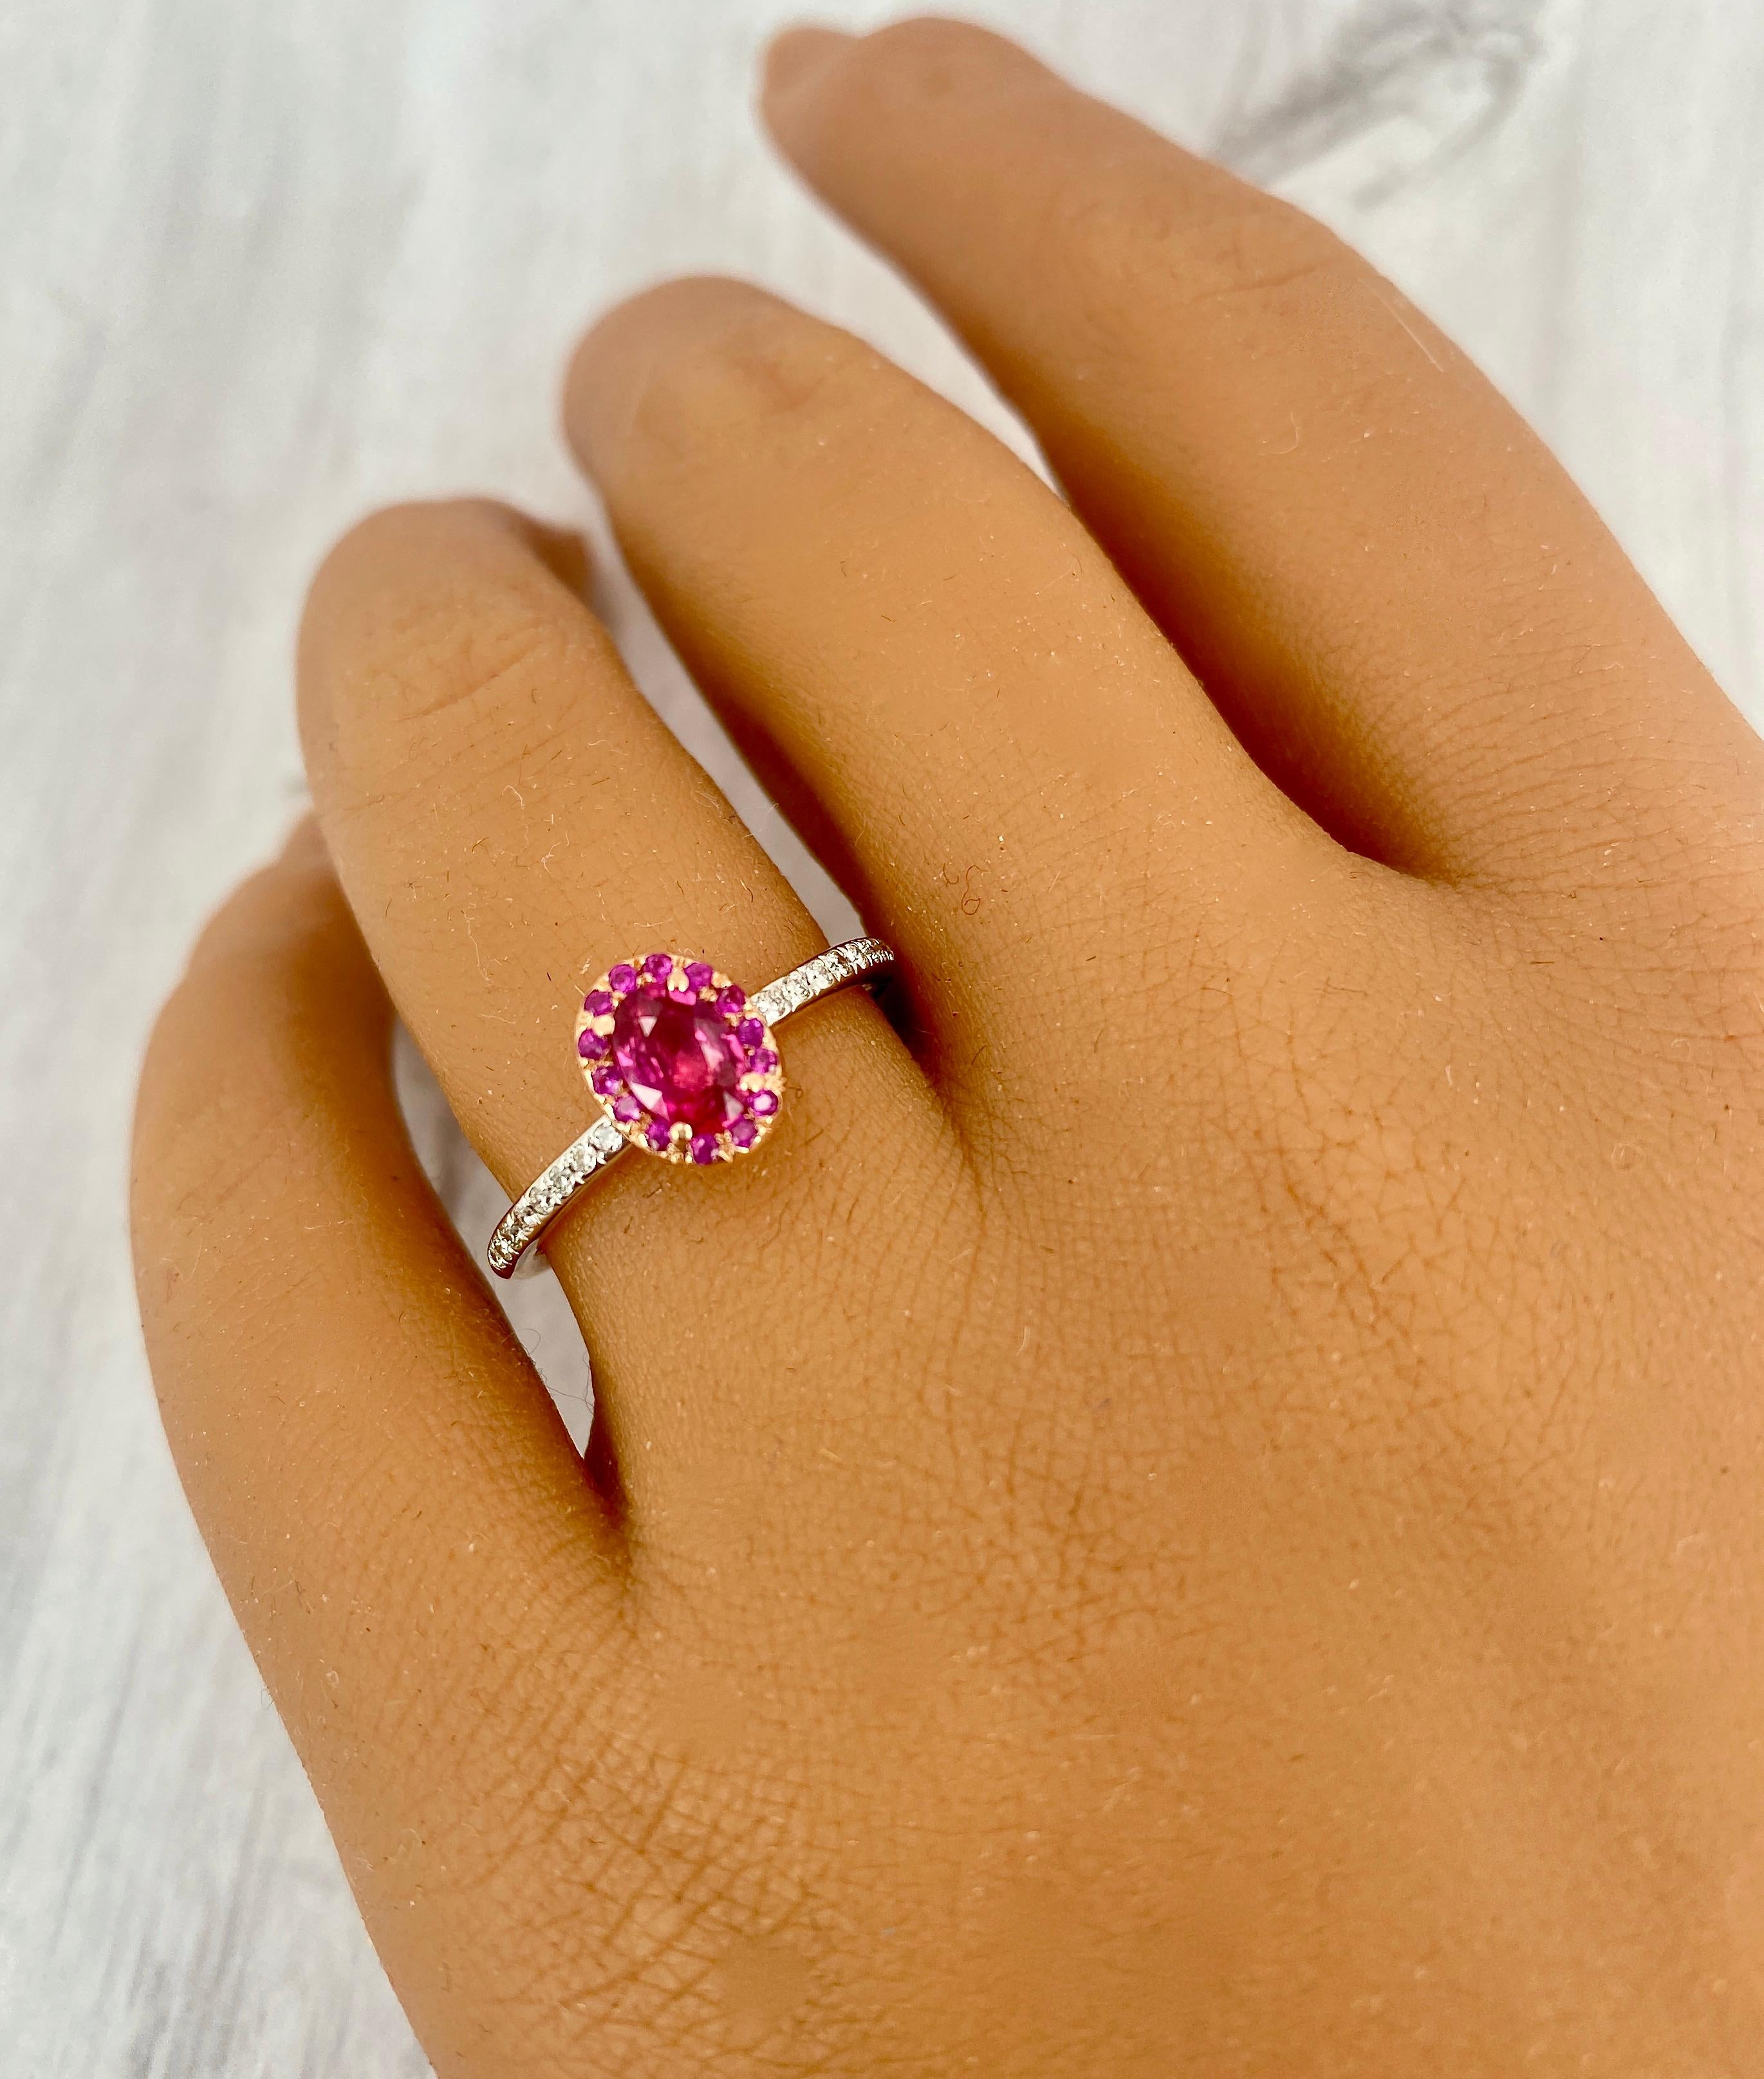 This is a beautiful ruby and diamond ring, with a unique ruby halo! It is stackable, fashionable, and affordable! You get a petite, colorful, and classy look in one ring! All stones are 100% natural and the gold is 14K!  

14K Rose Gold- 2.29 grams